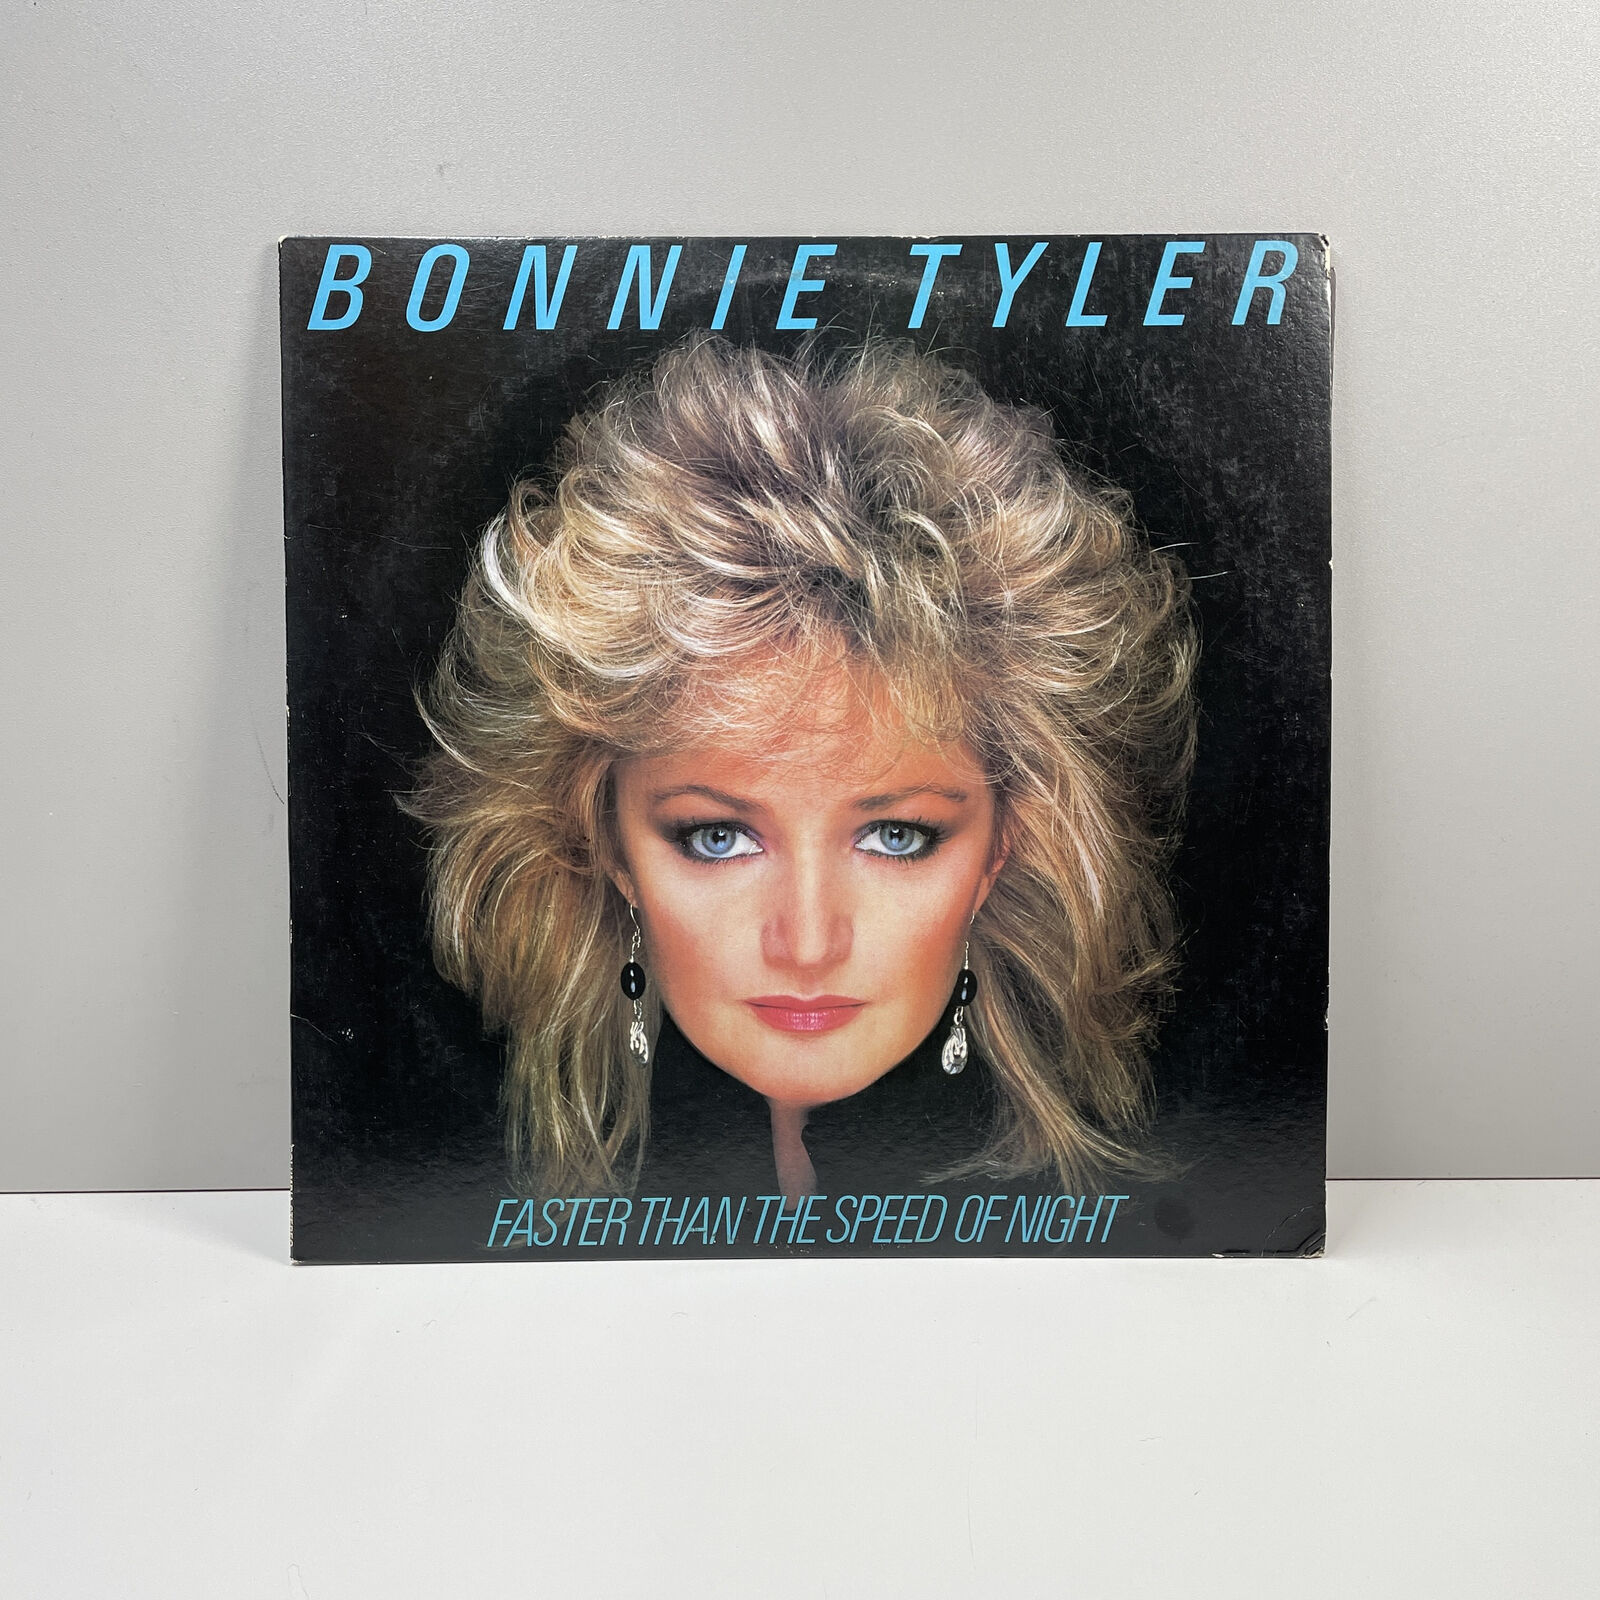 Bonnie Tyler - Faster Than The Speed Of Night - Vinyl LP Record - 1983